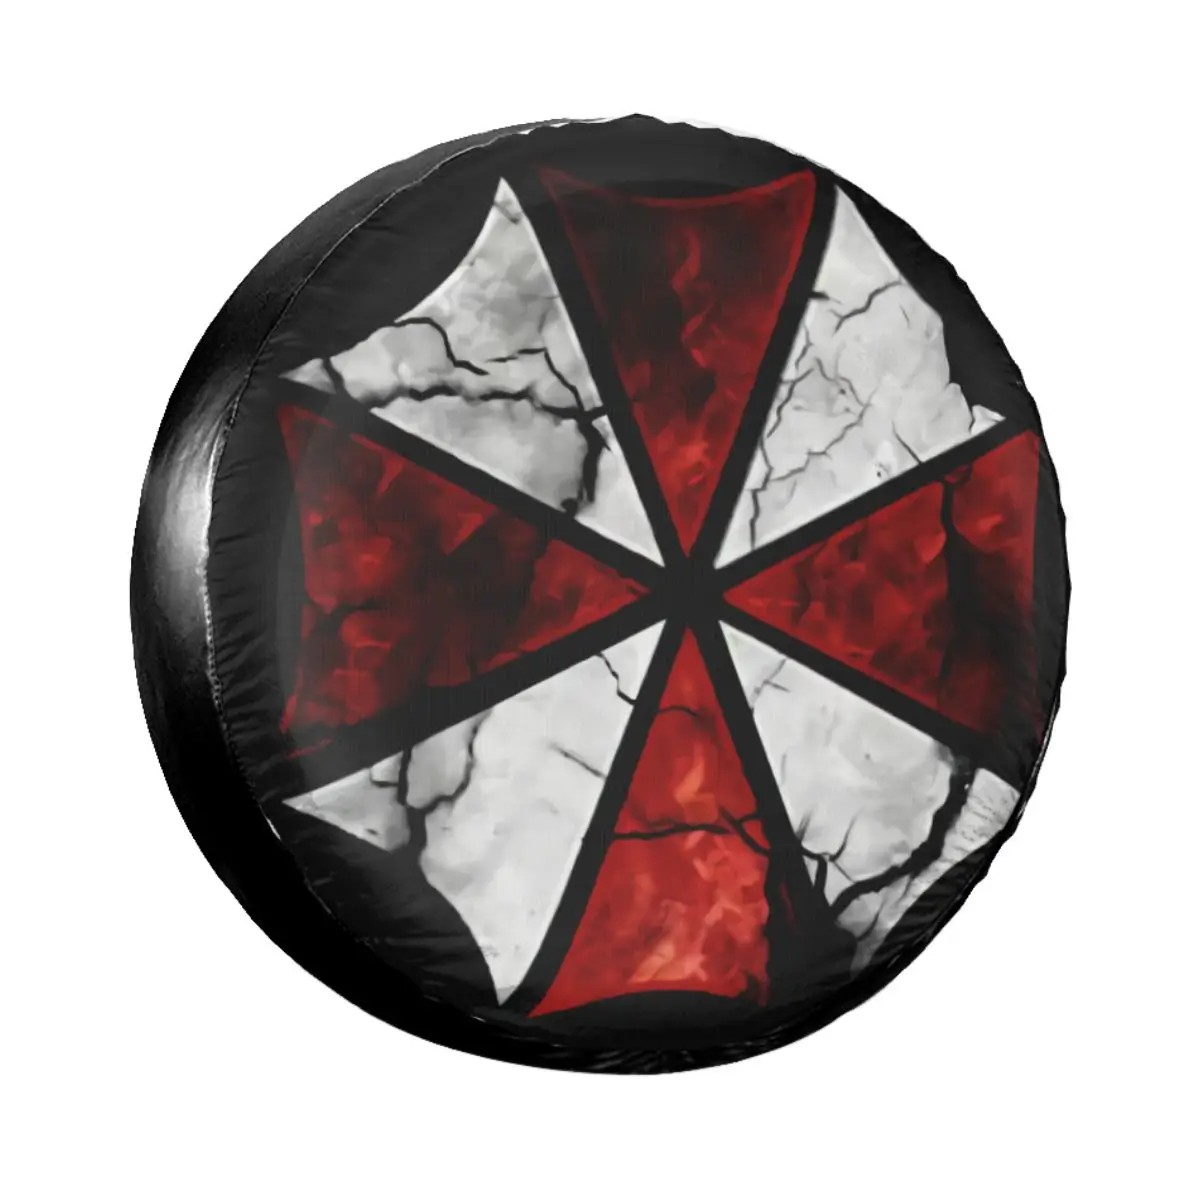 Umbrella Corporation Logo Spare Wheel Tire Cover Case Bag Pouch for Jeep Horror Military Vehicle Accessories 14